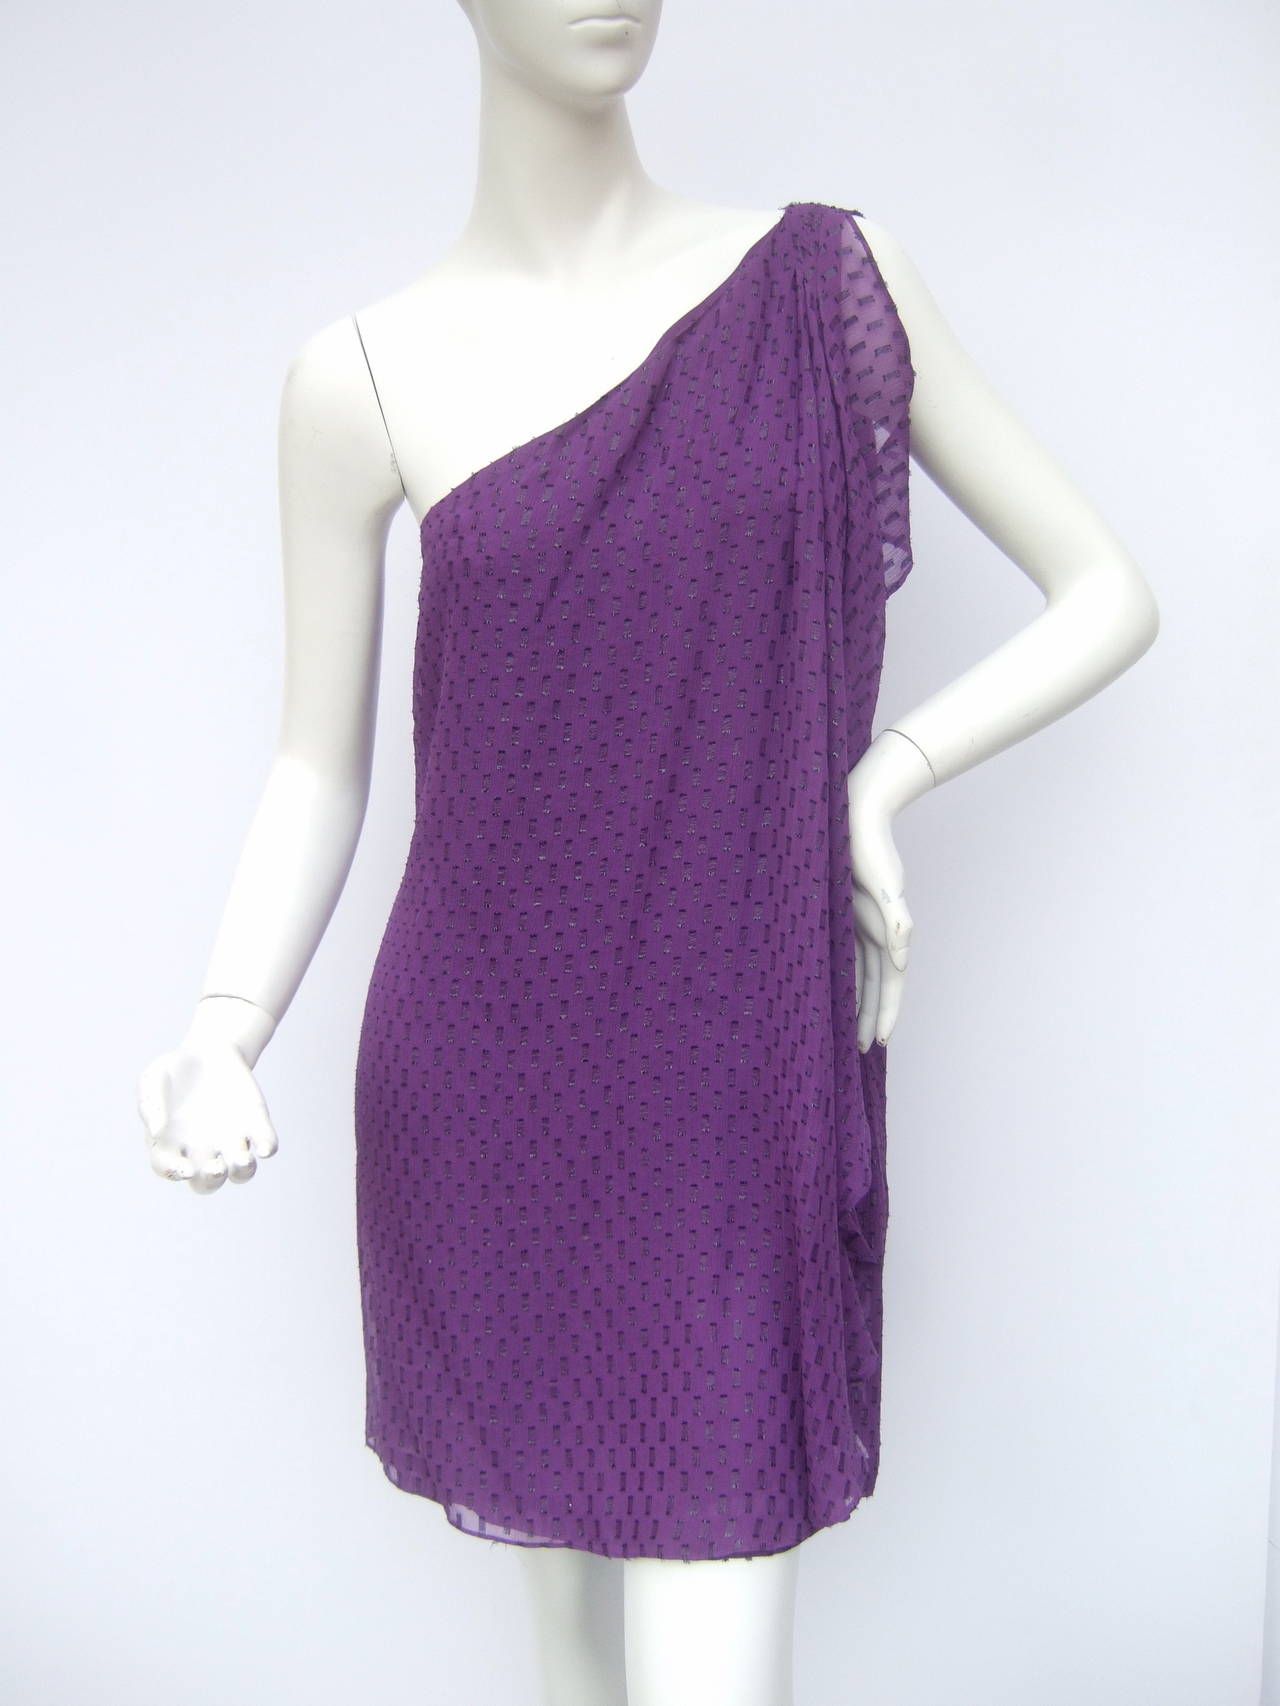 Halston Heritage violet silk one shoulder dress. New with tags US Size 8
The breezy sheer dress is designed with violet silk fabric with a geometric jacquard pattern. One side of the dress is designed with a sheer ruffled tiered overdraped panel